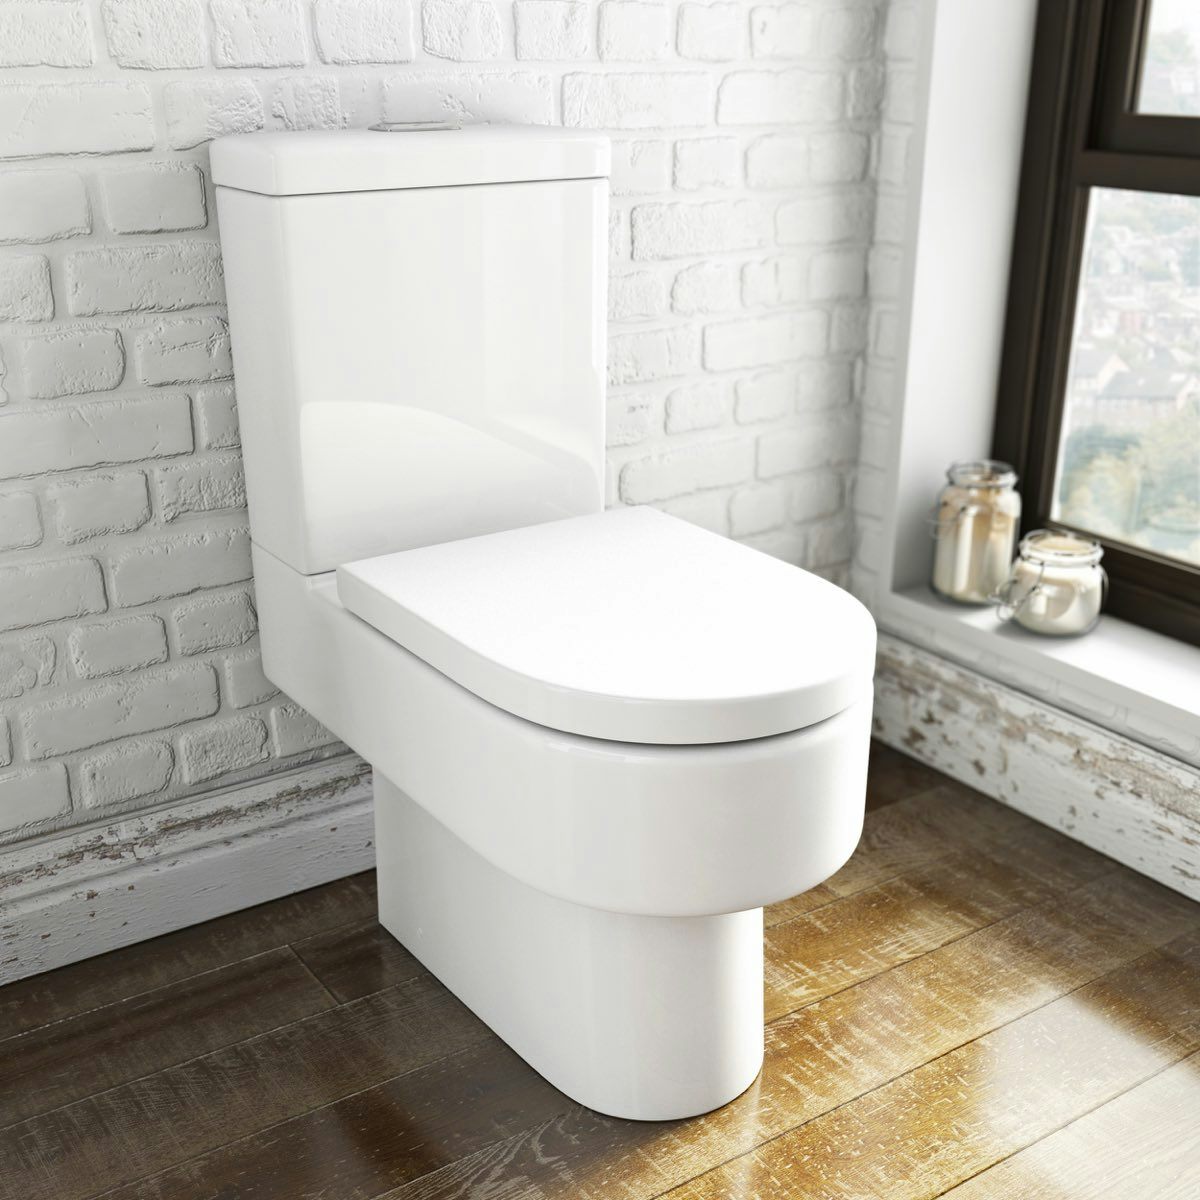 Orchard Dee Close coupled Toilet with Rectangular Push Button and Soft Close Toilet seat